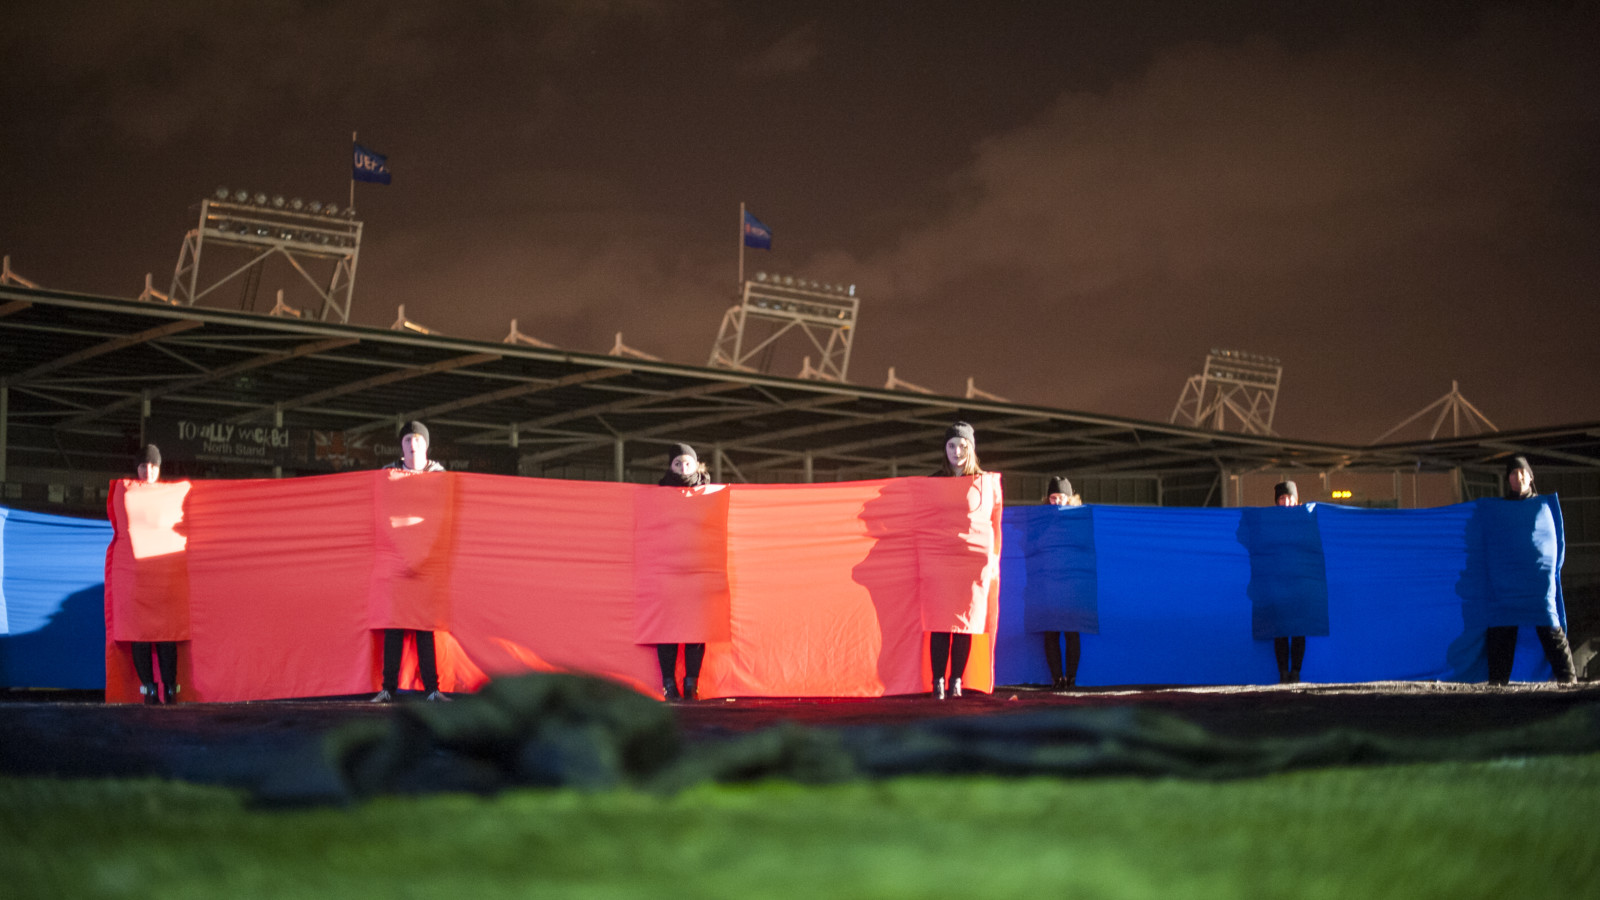 In a rugby stadium seven people stand on the grass under a night sky. They stand a meter away from each other and are connected by stretched out fabric, which also wraps around each of them. One group is wrapped in red fabric, another group in blue.